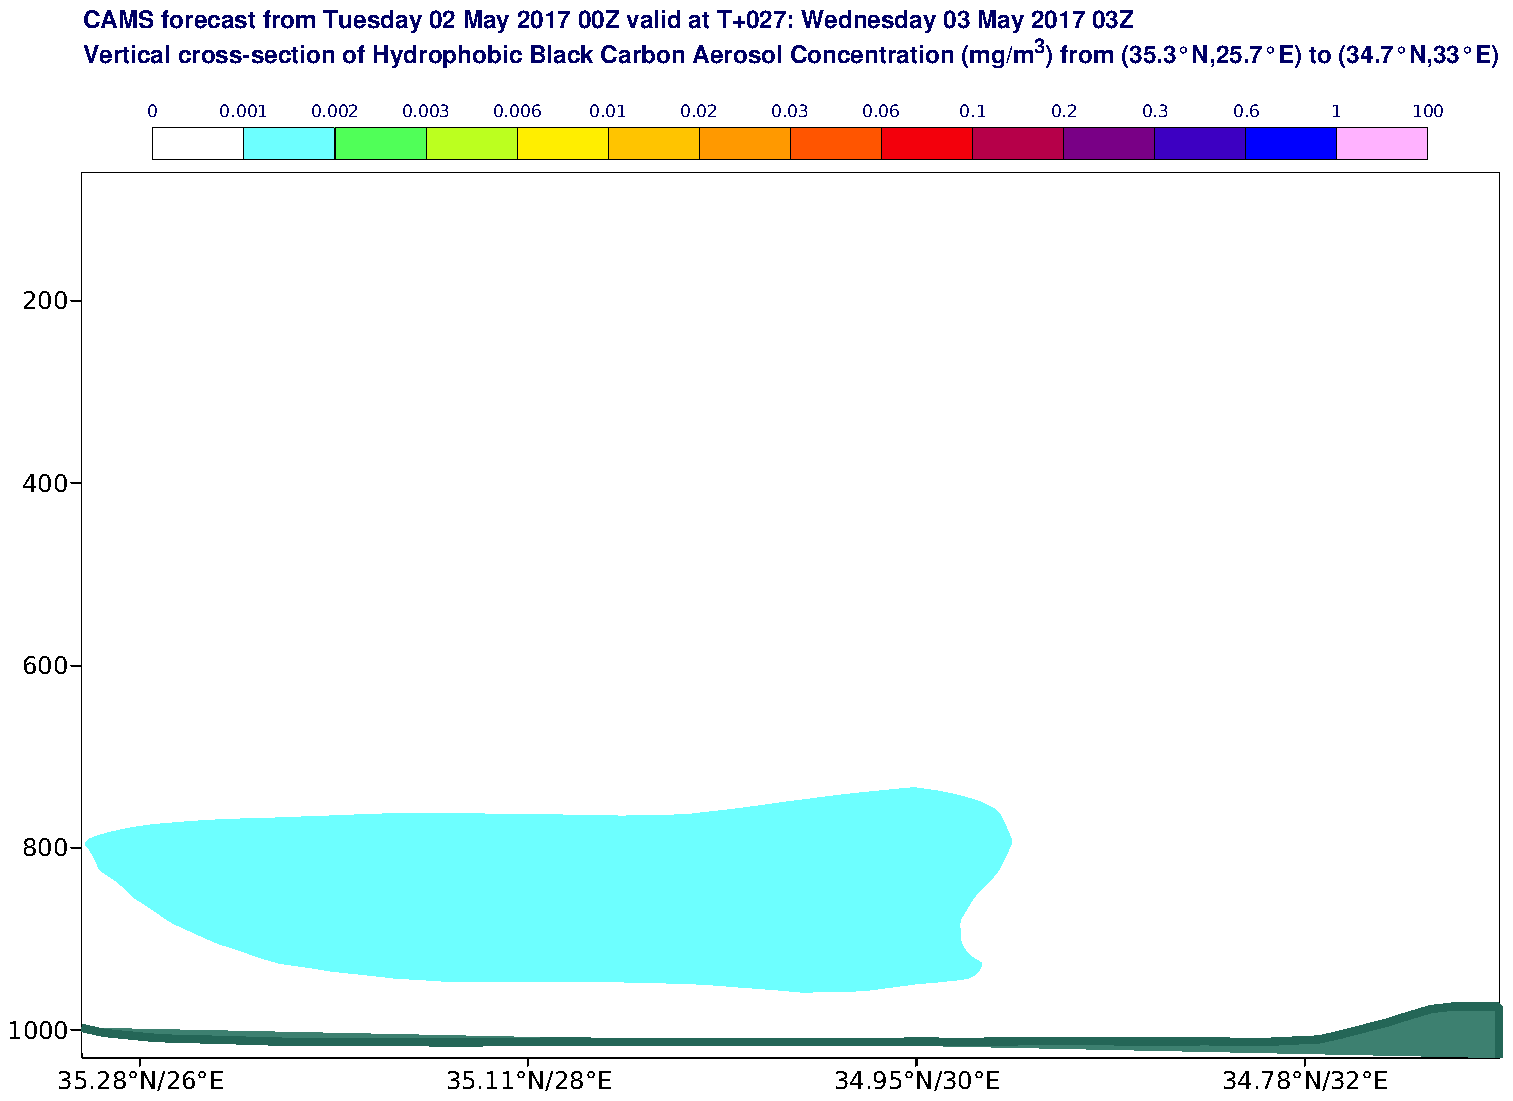 Vertical cross-section of Hydrophobic Black Carbon Aerosol Concentration (mg/m3) valid at T27 - 2017-05-03 03:00